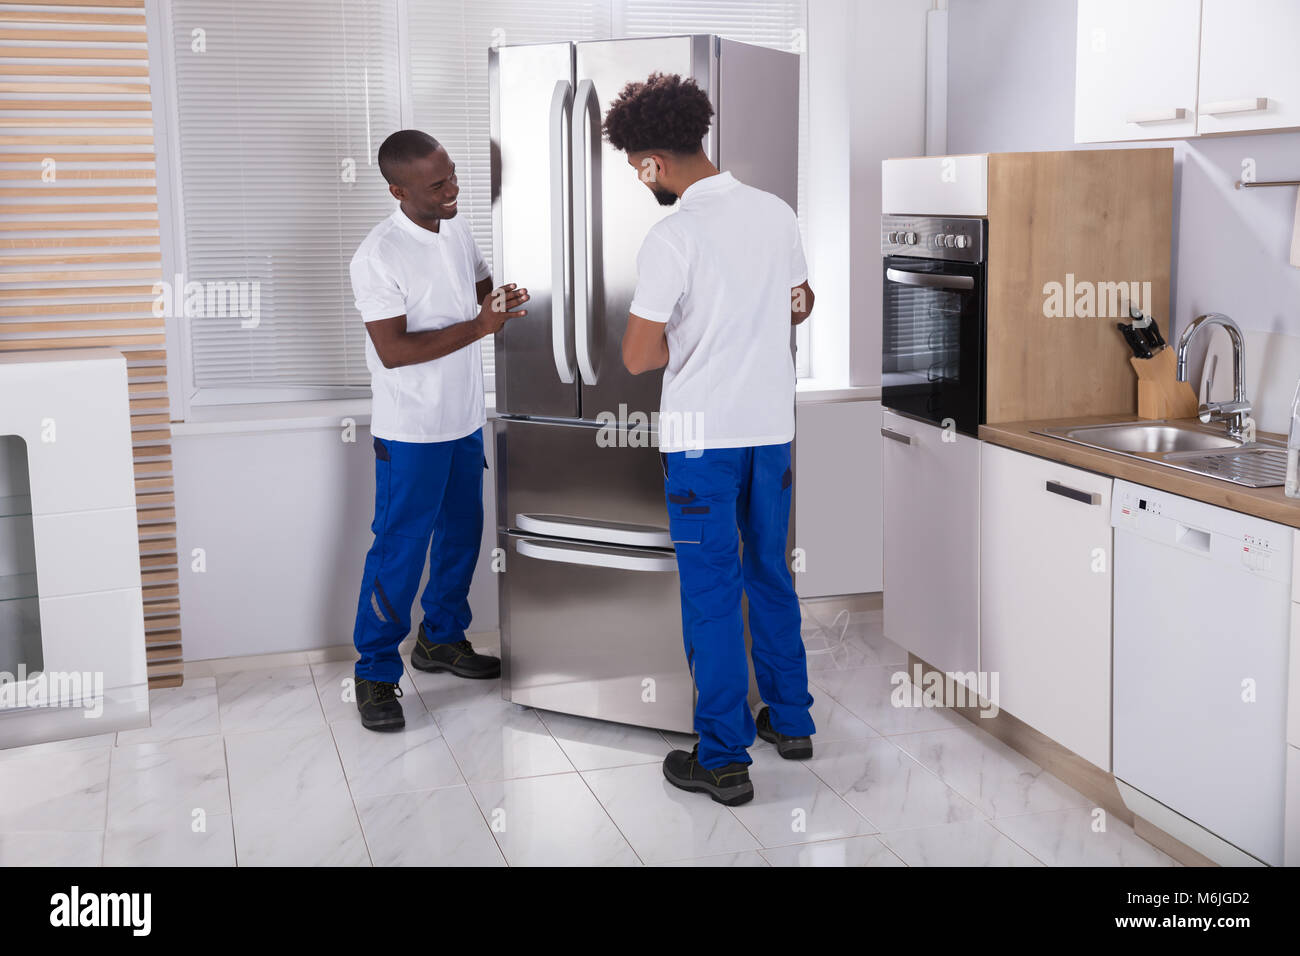 Two Male Movers In Uniform Fixing The Freezer In The Kitchen At Home Stock Photo